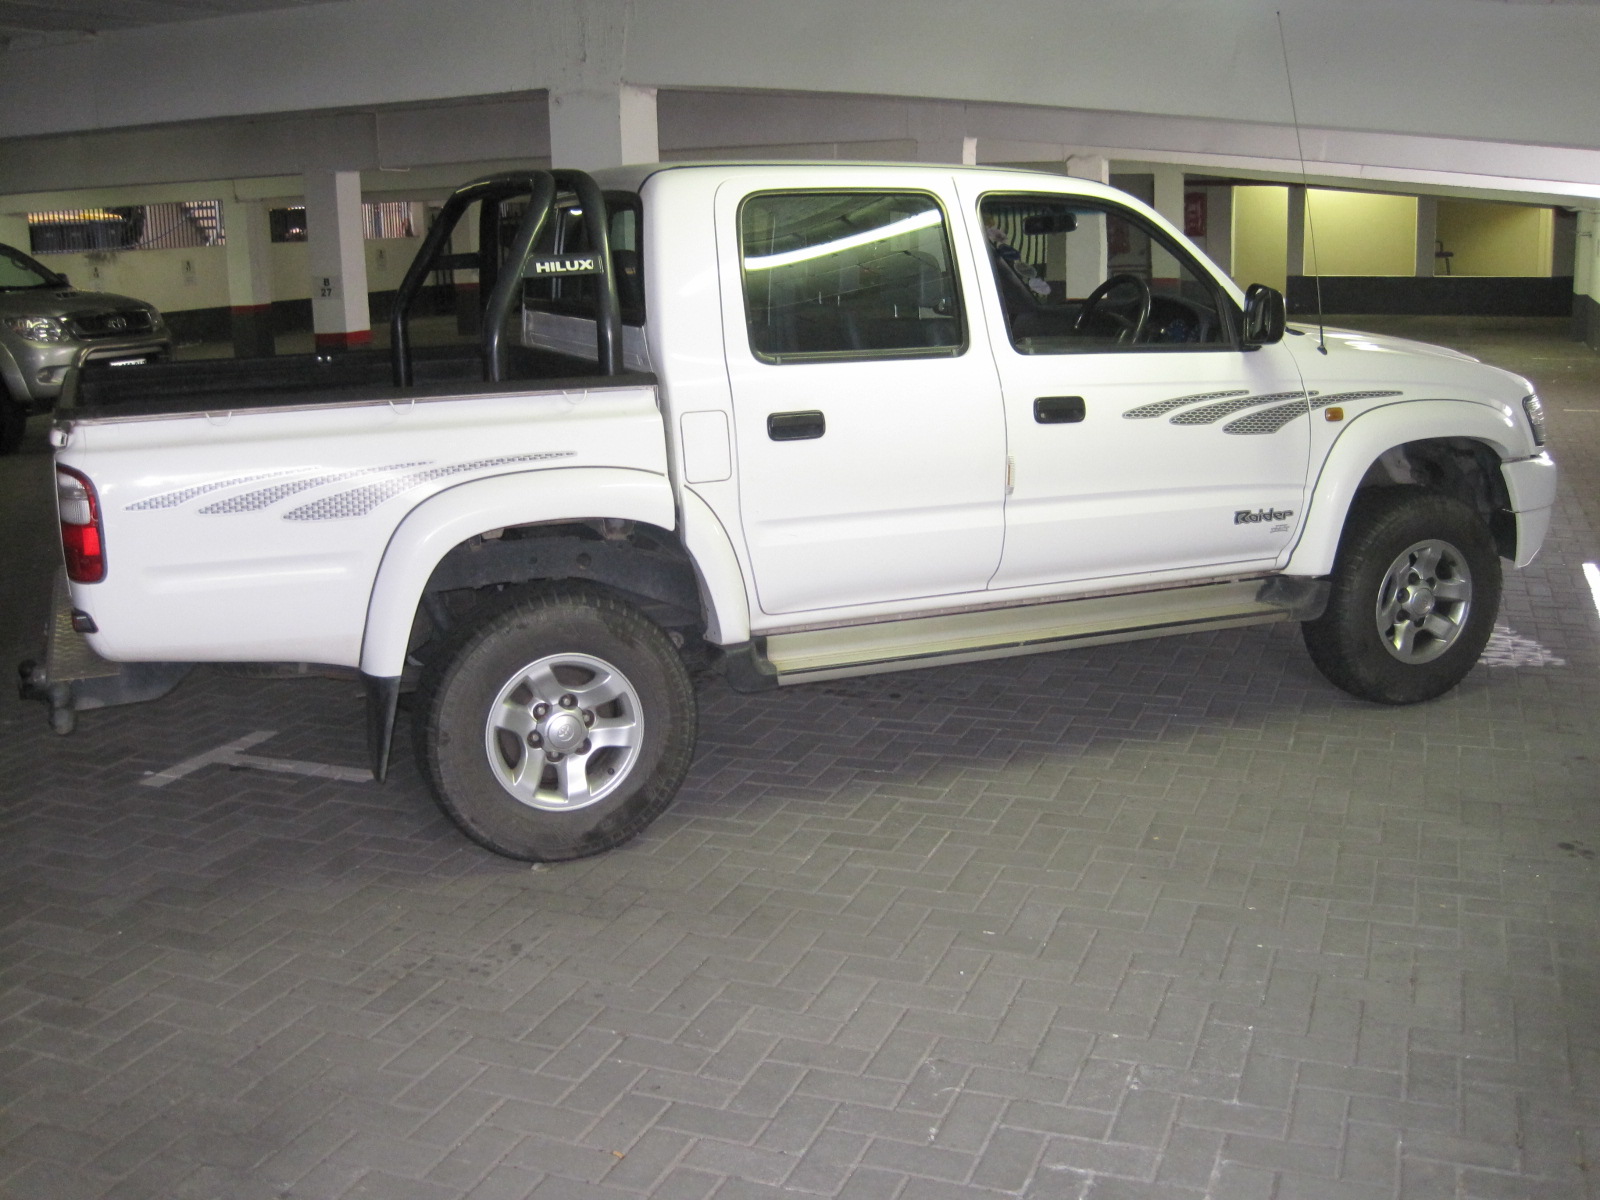 GumTree OLX cars and bakkies for sale in Cape Town. olx Used Vehicles for Sale, dealer ...